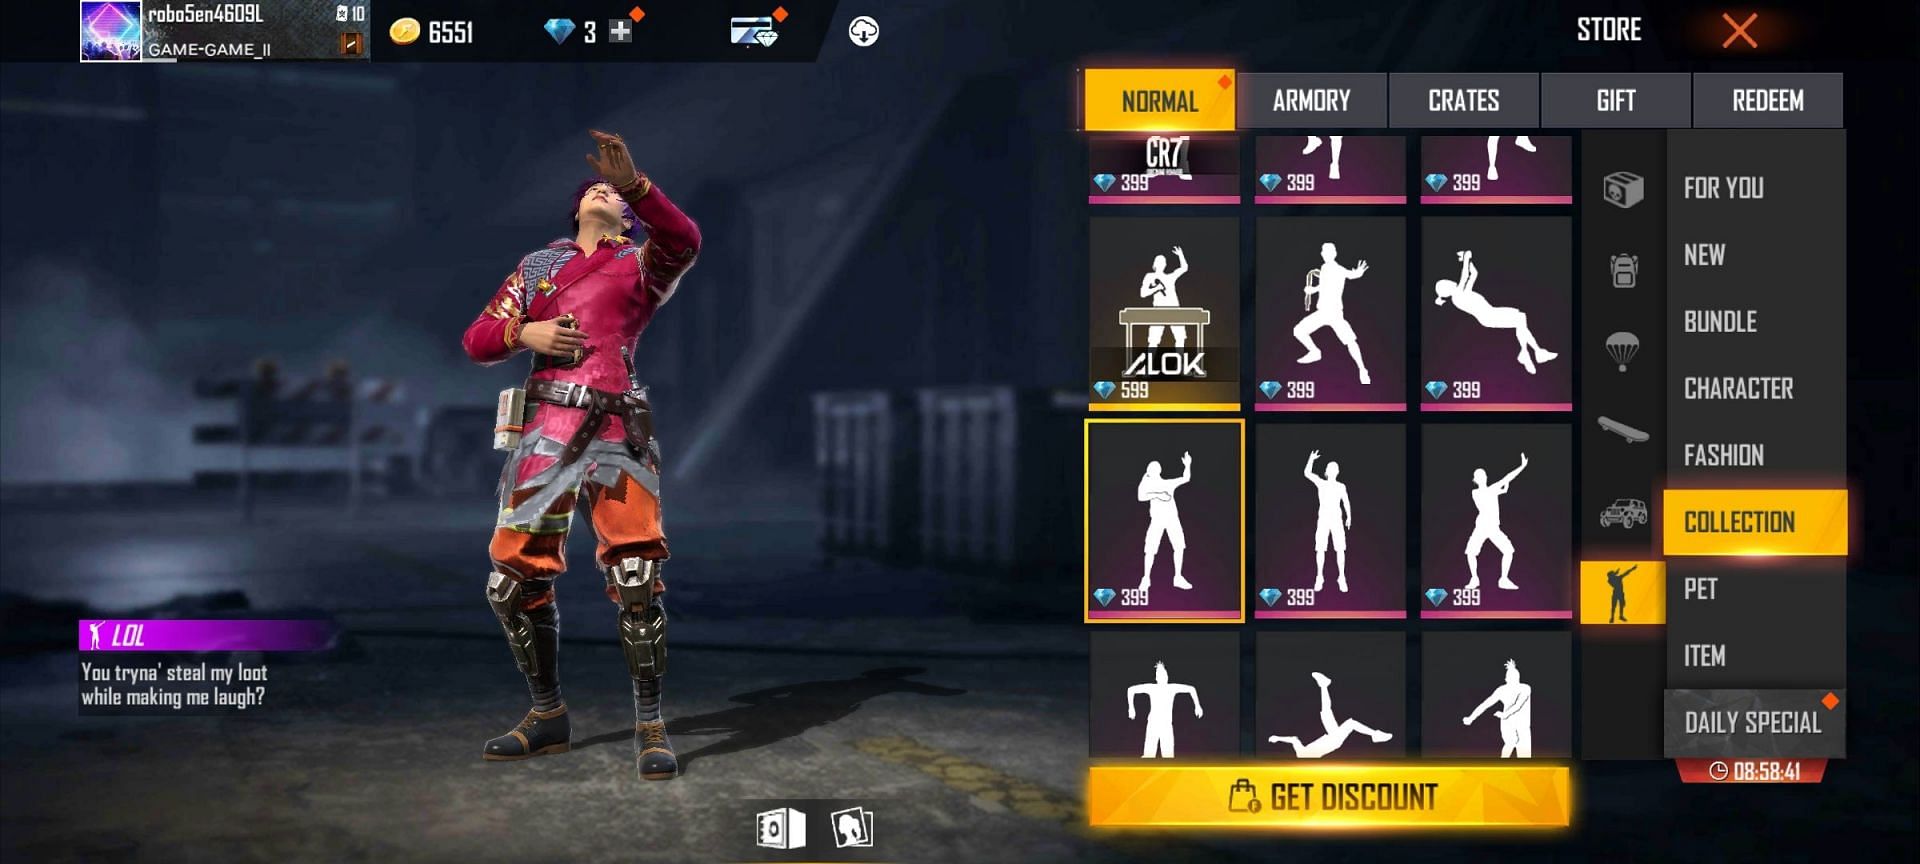 The LOL emote is among the items available in the store (Image via Garena Free Fire)